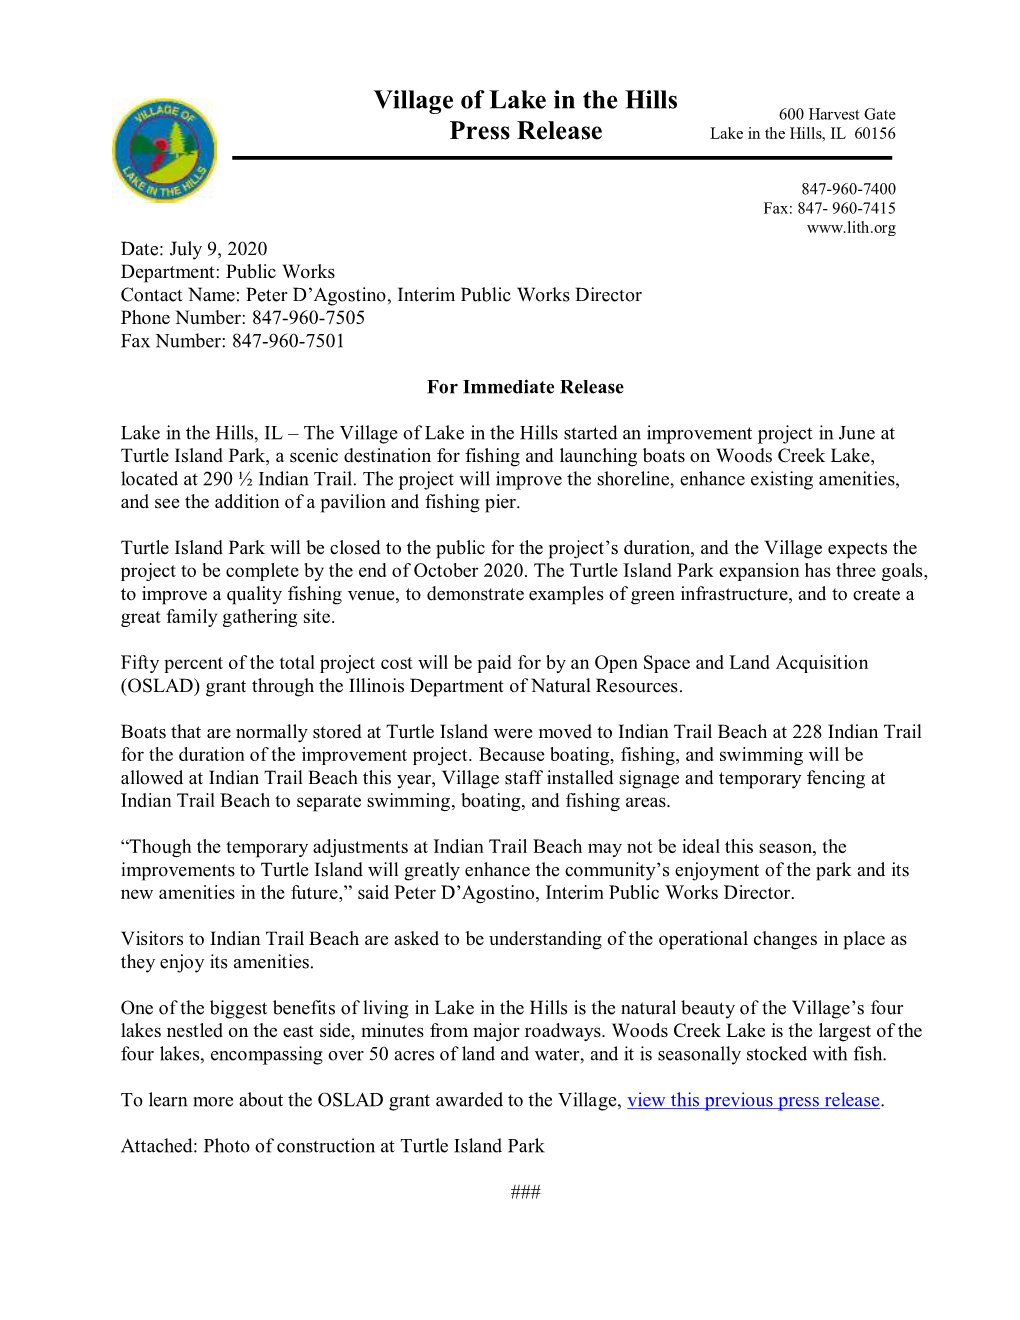 Village of Lake in the Hills Press Release